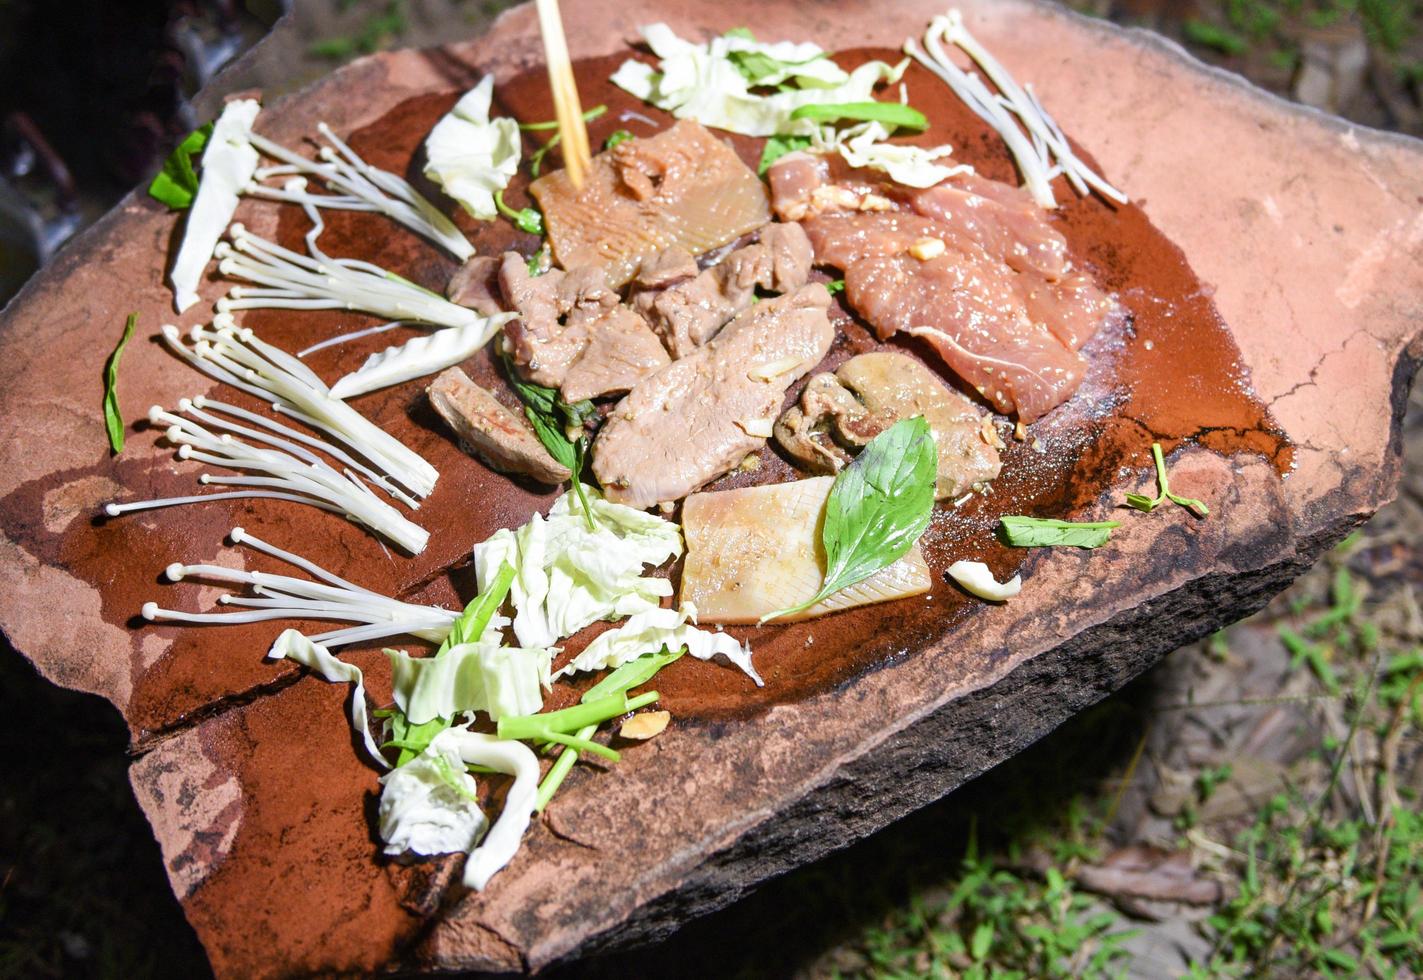 Food on stone - shabu shabu grilled pork meat and vegetables and mushrooms on hot stone plate , Survival in the wild concept photo